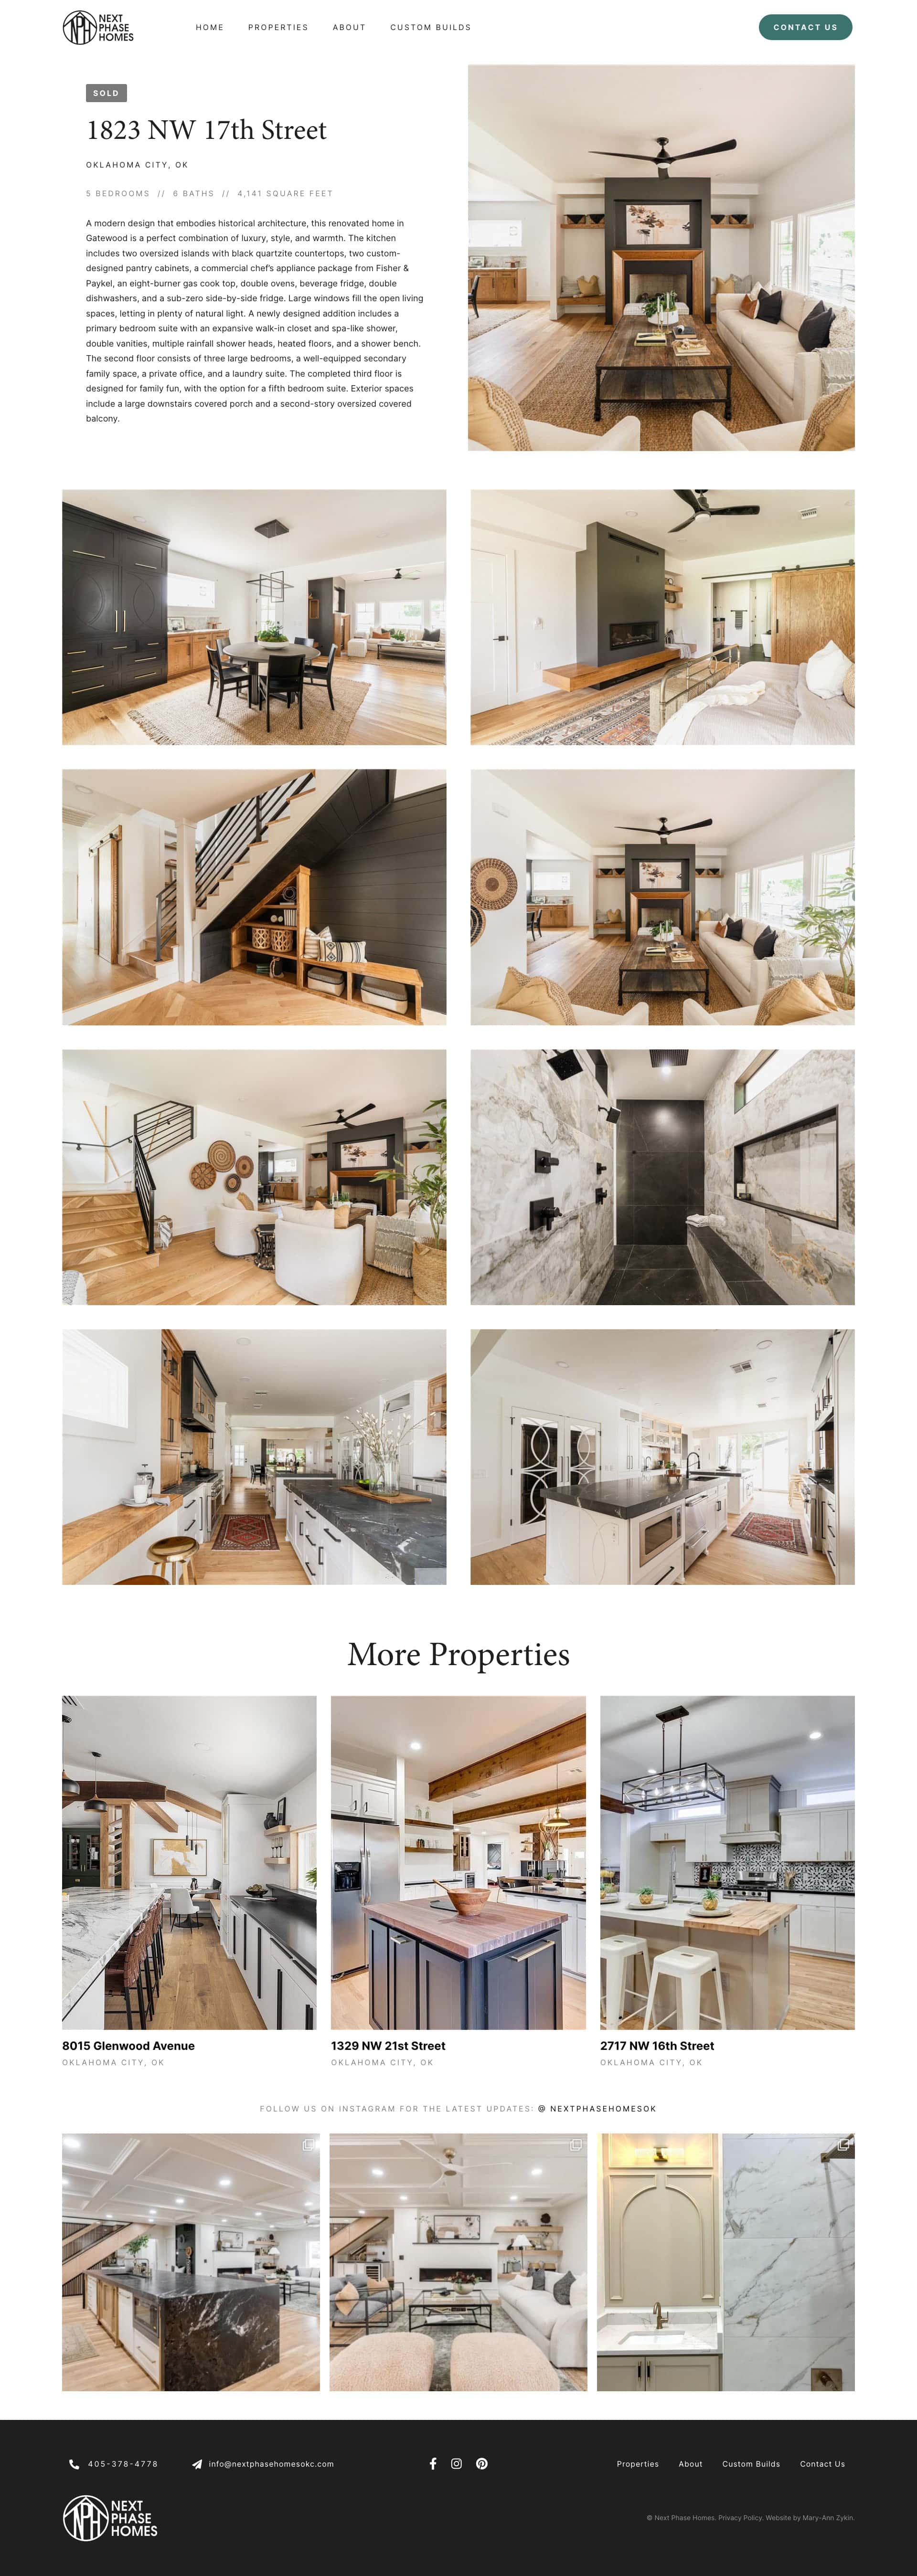 Next Phase Homes Individual Property Page Template